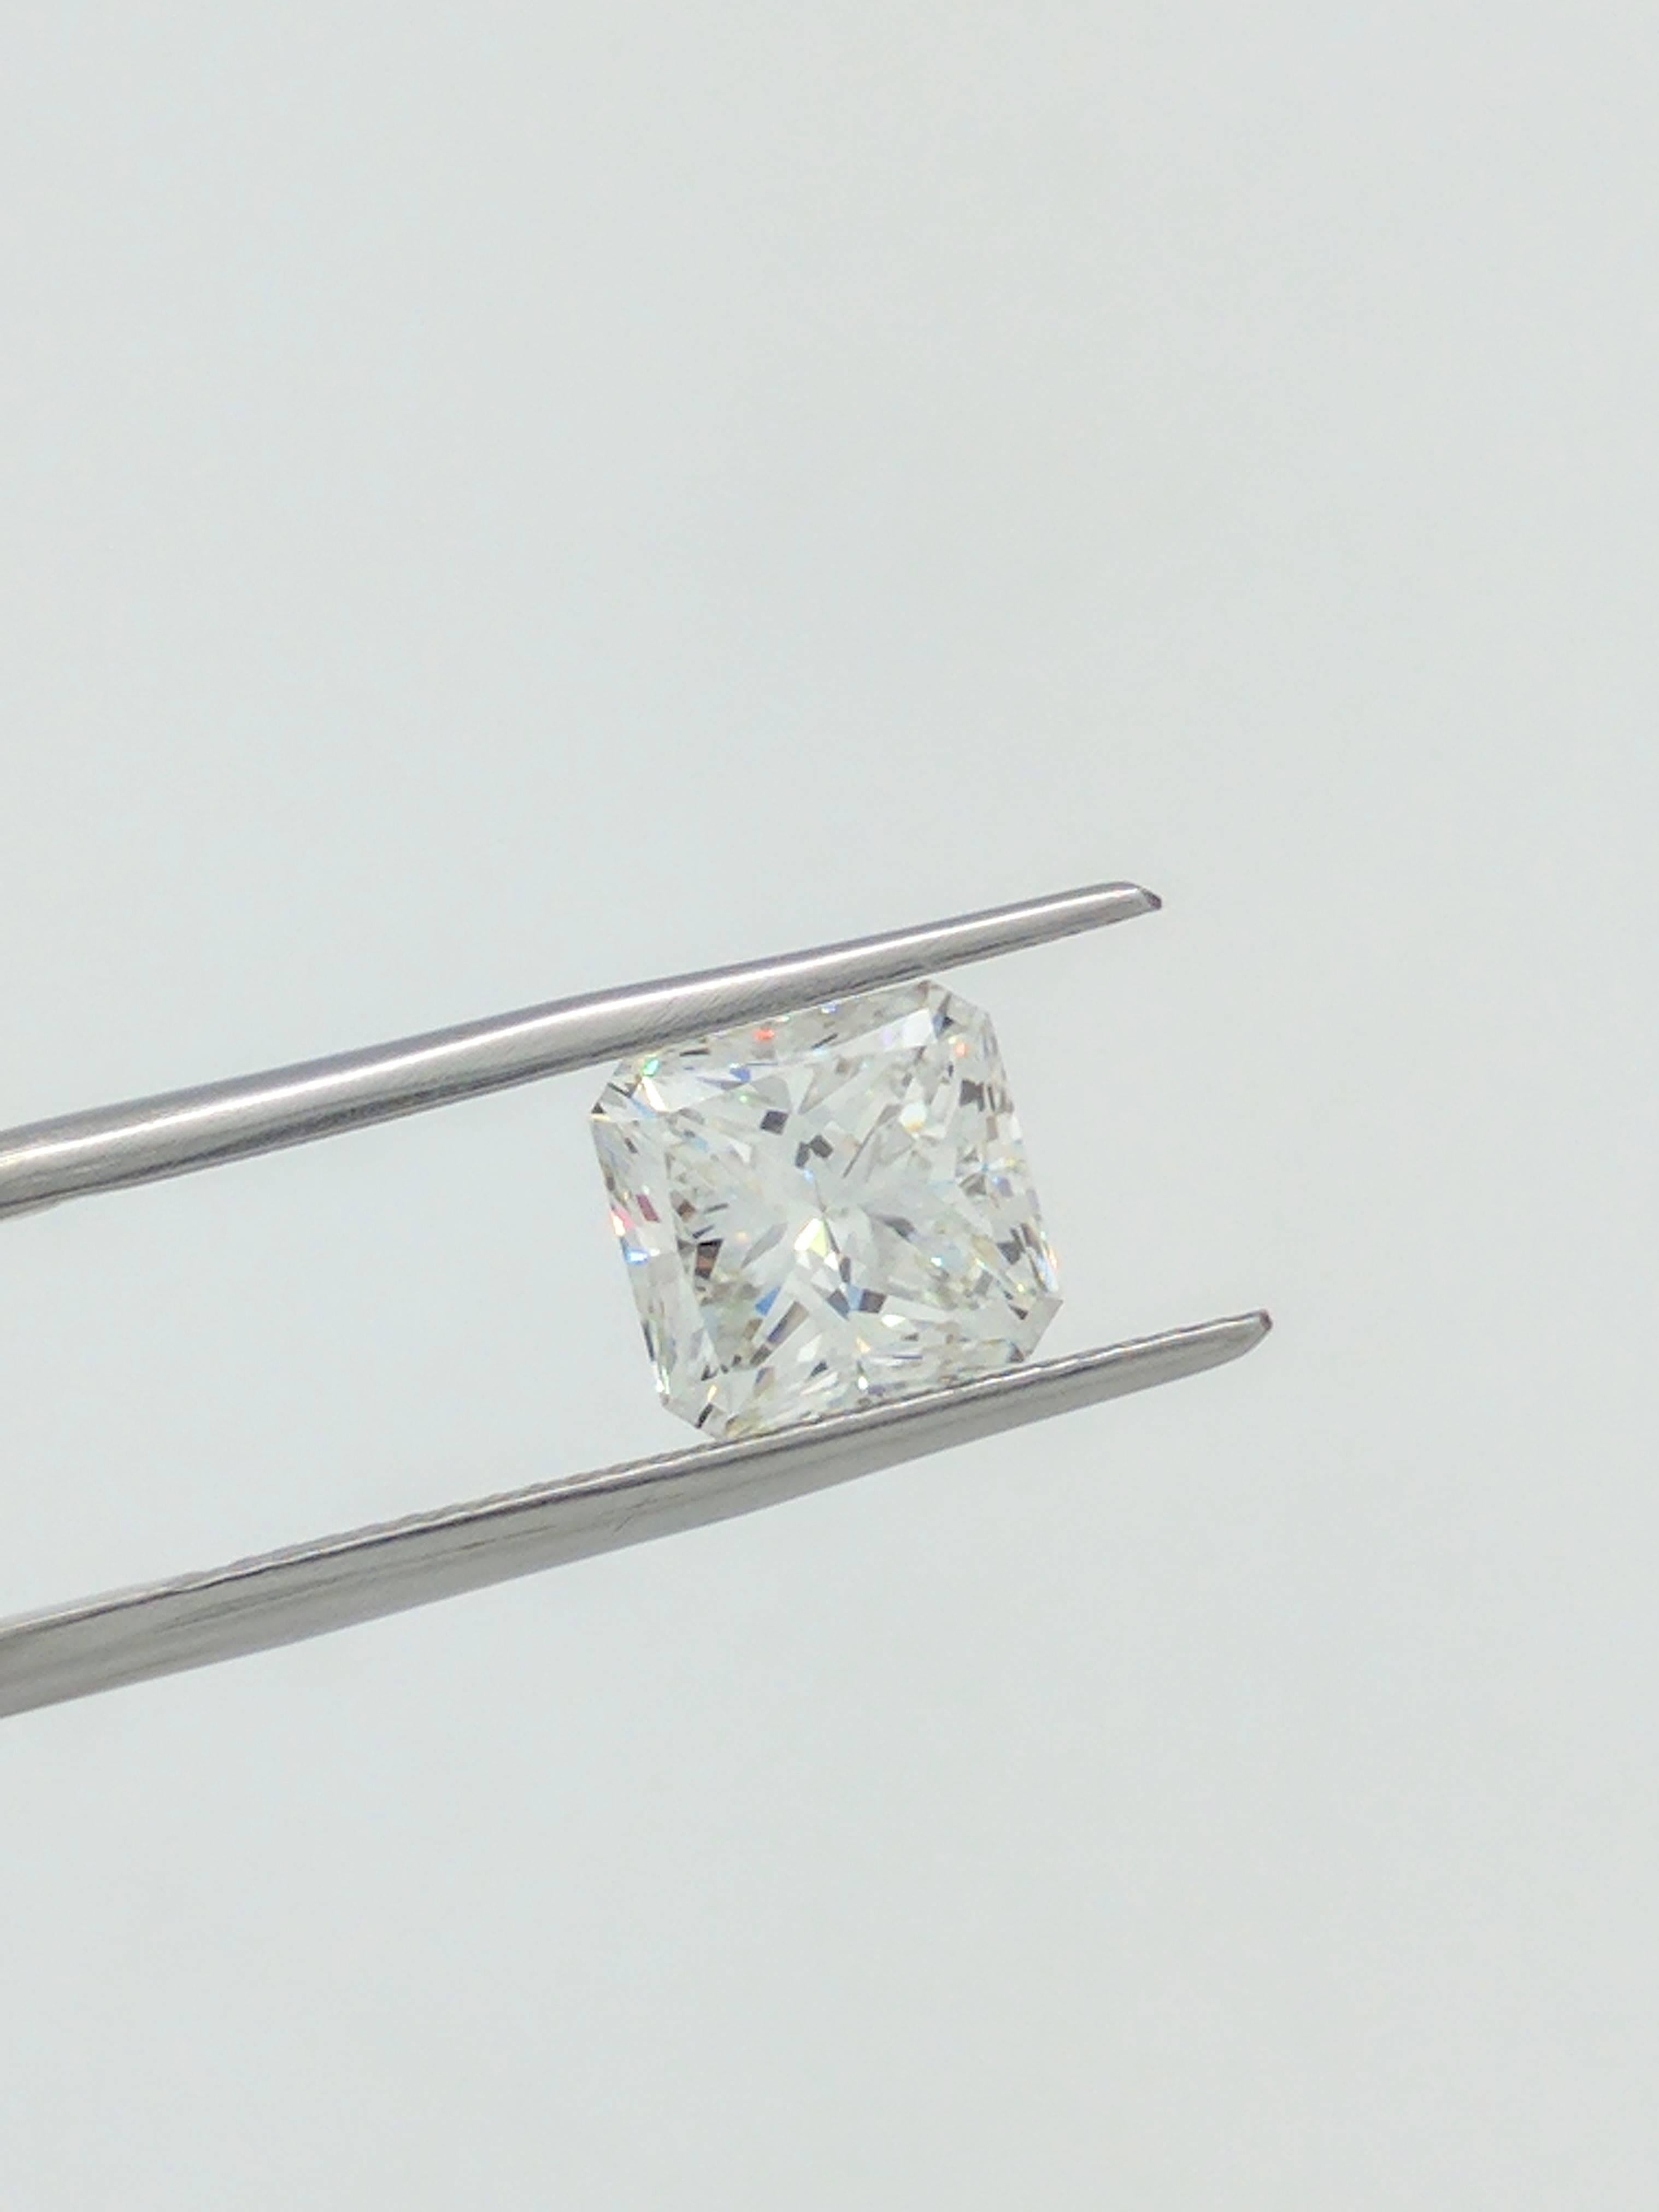 You are viewing a Stunning 3.17 carat cut-cornered square modified brilliant cut diamond. This diamond is certified by GIA (Gemological Institute of America) and has been graded as IF (internally flawless) in clarity and H color.


GIA Grading